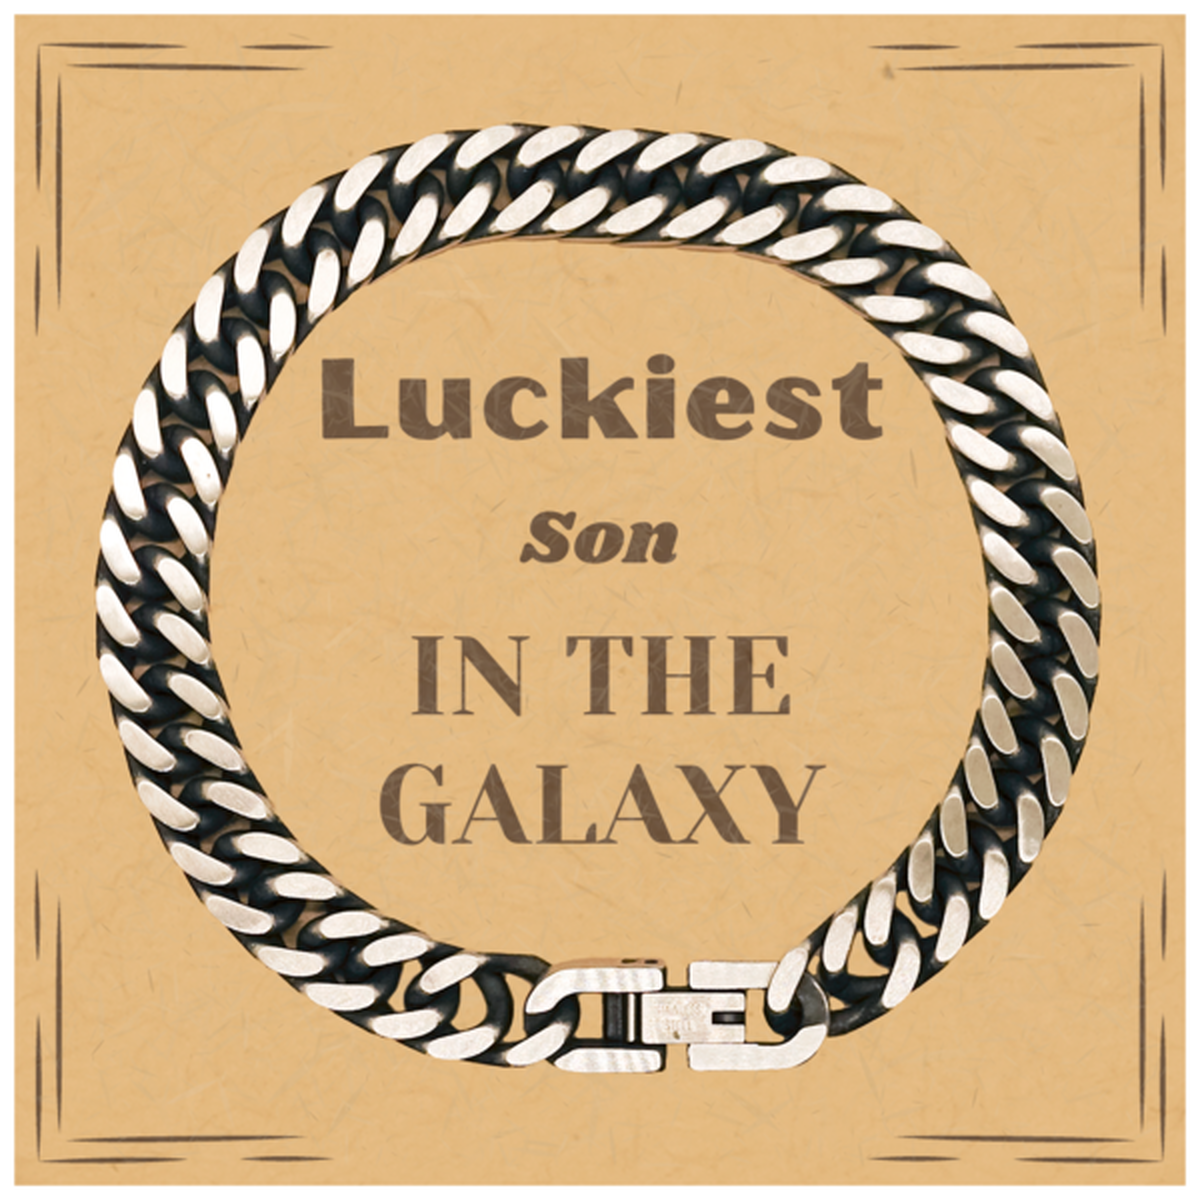 Luckiest Son in the Galaxy, To My Son Message Card Gifts, Christmas Son Cuban Link Chain Bracelet Gifts, X-mas Birthday Unique Gifts For Son Men Women